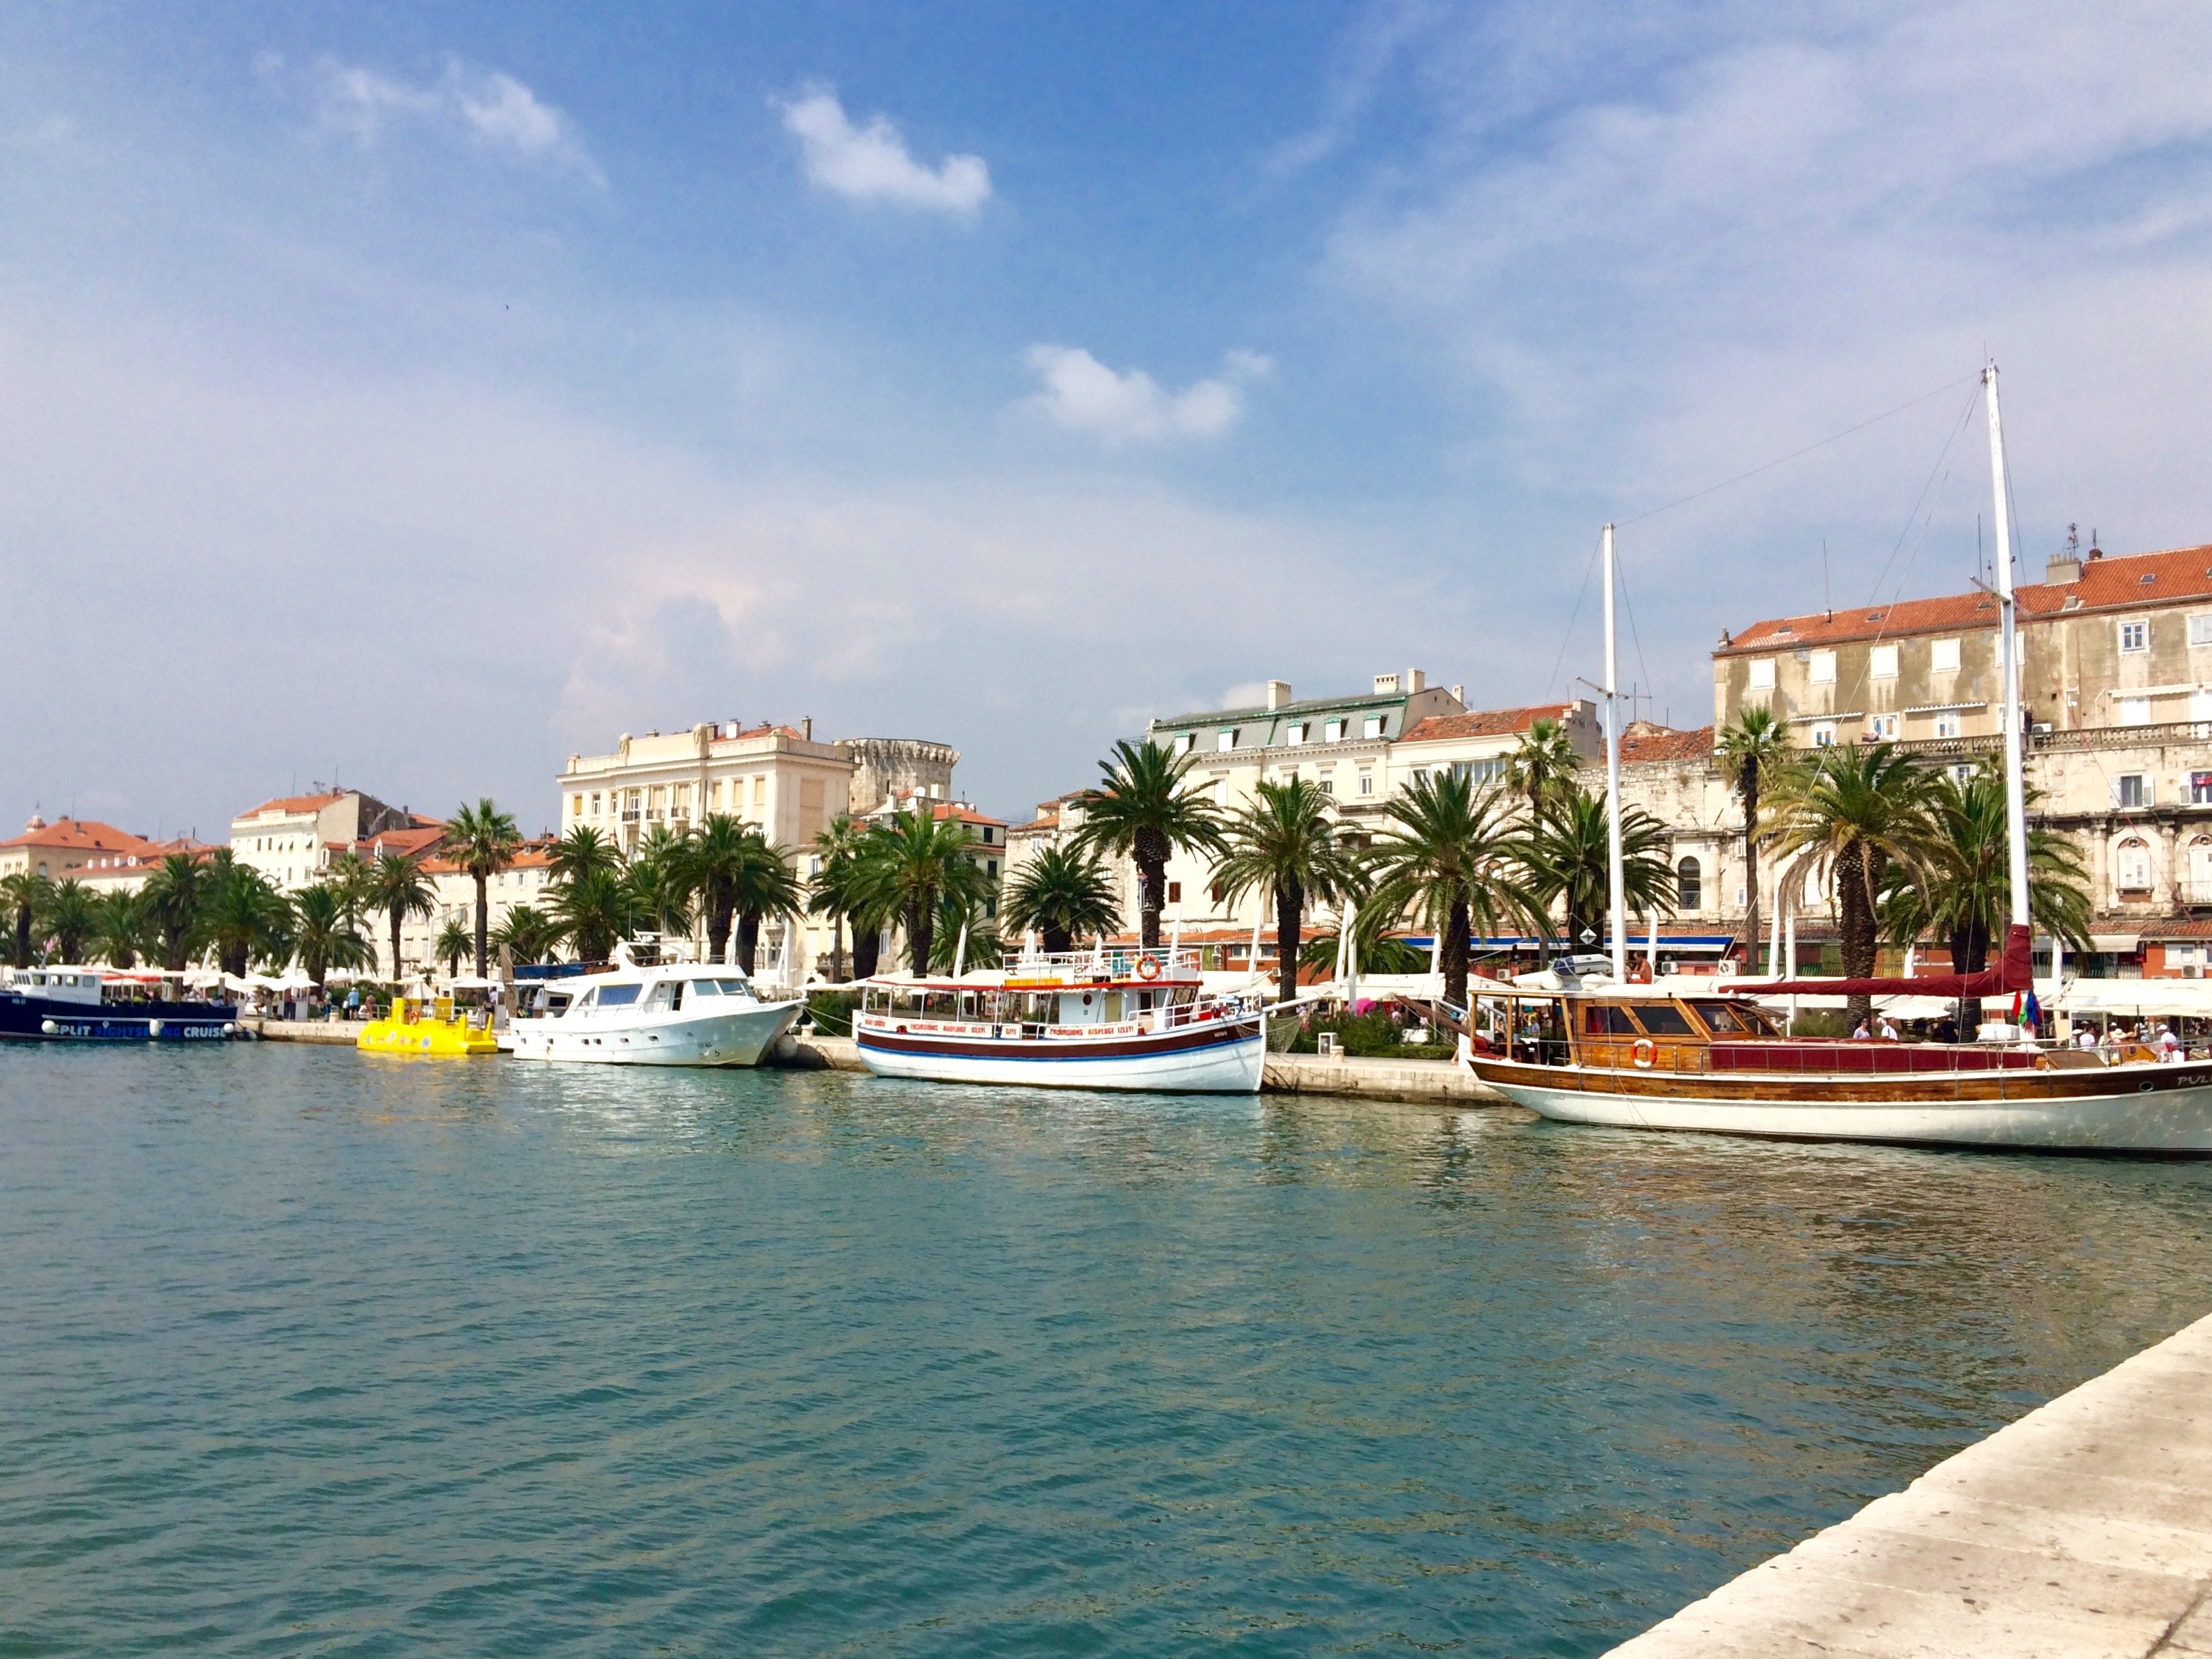 Split,Croatia-Where to Travel in 2017- Top Travel Bloggers Share Their Favorite Destinations www.casualtravelist.com